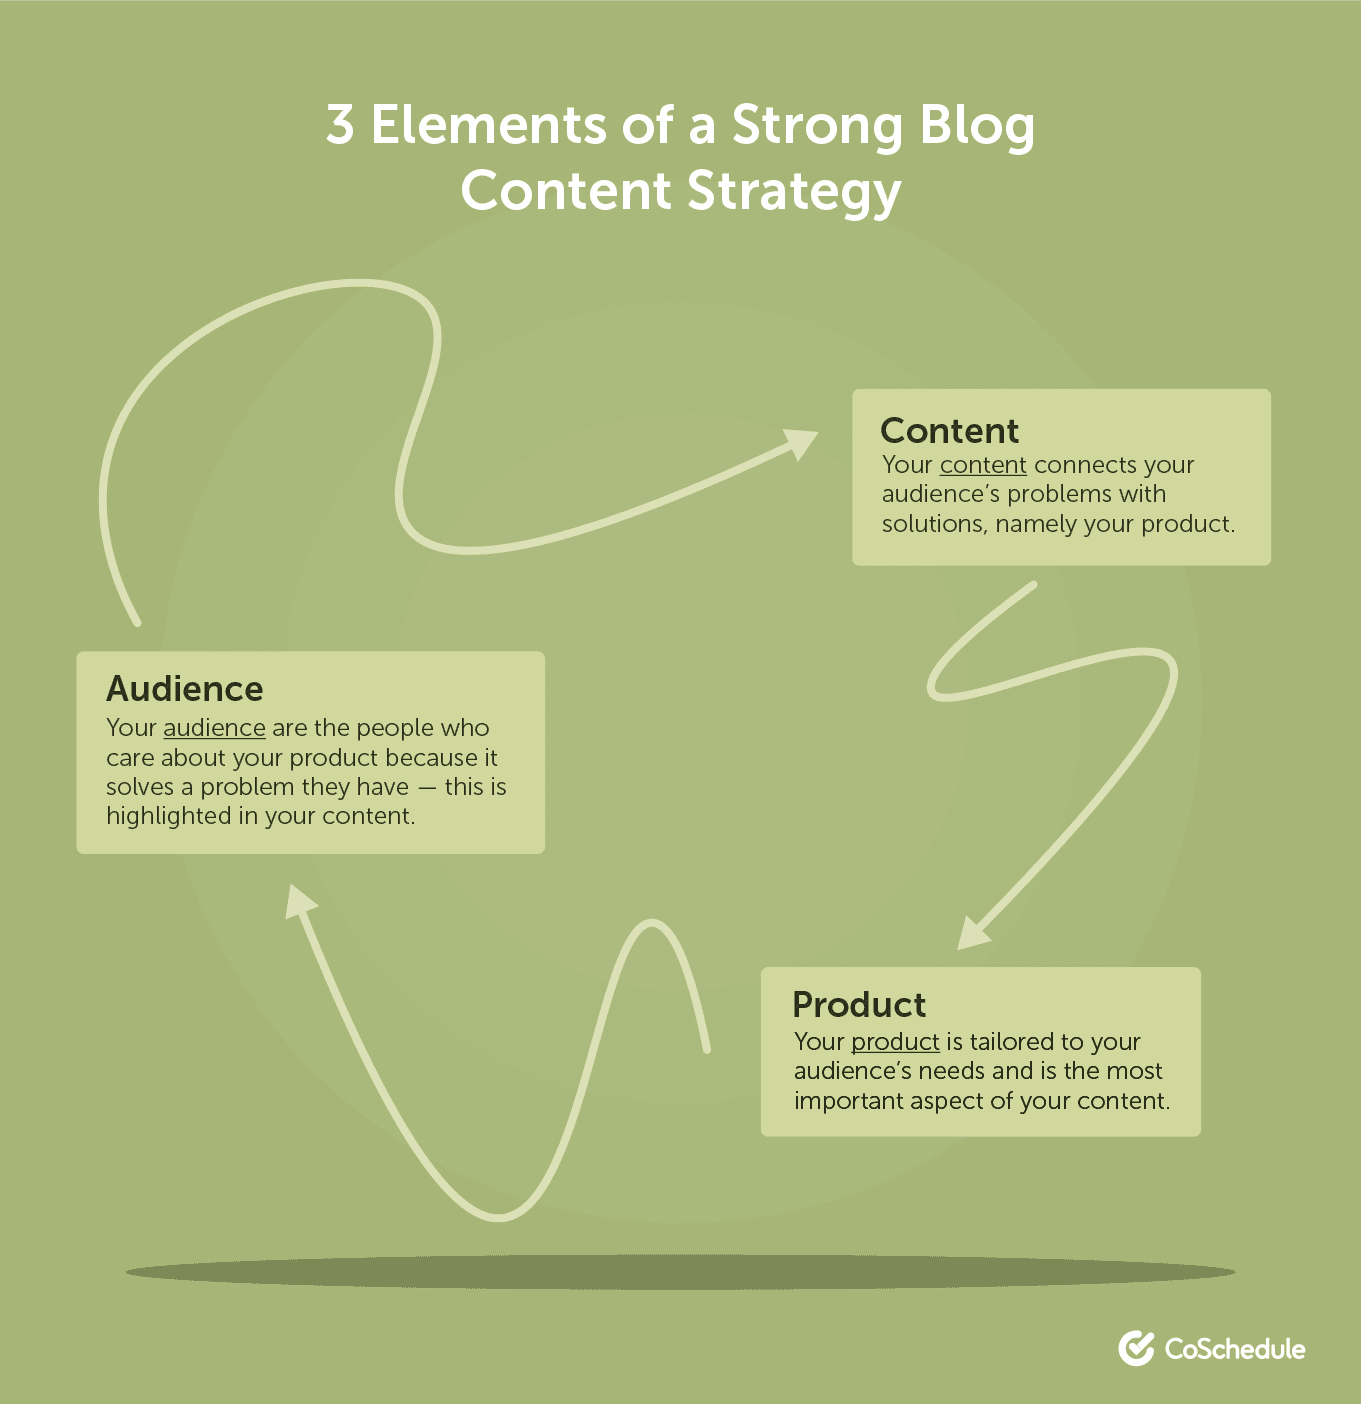 3 elements of a strong blog content strategy